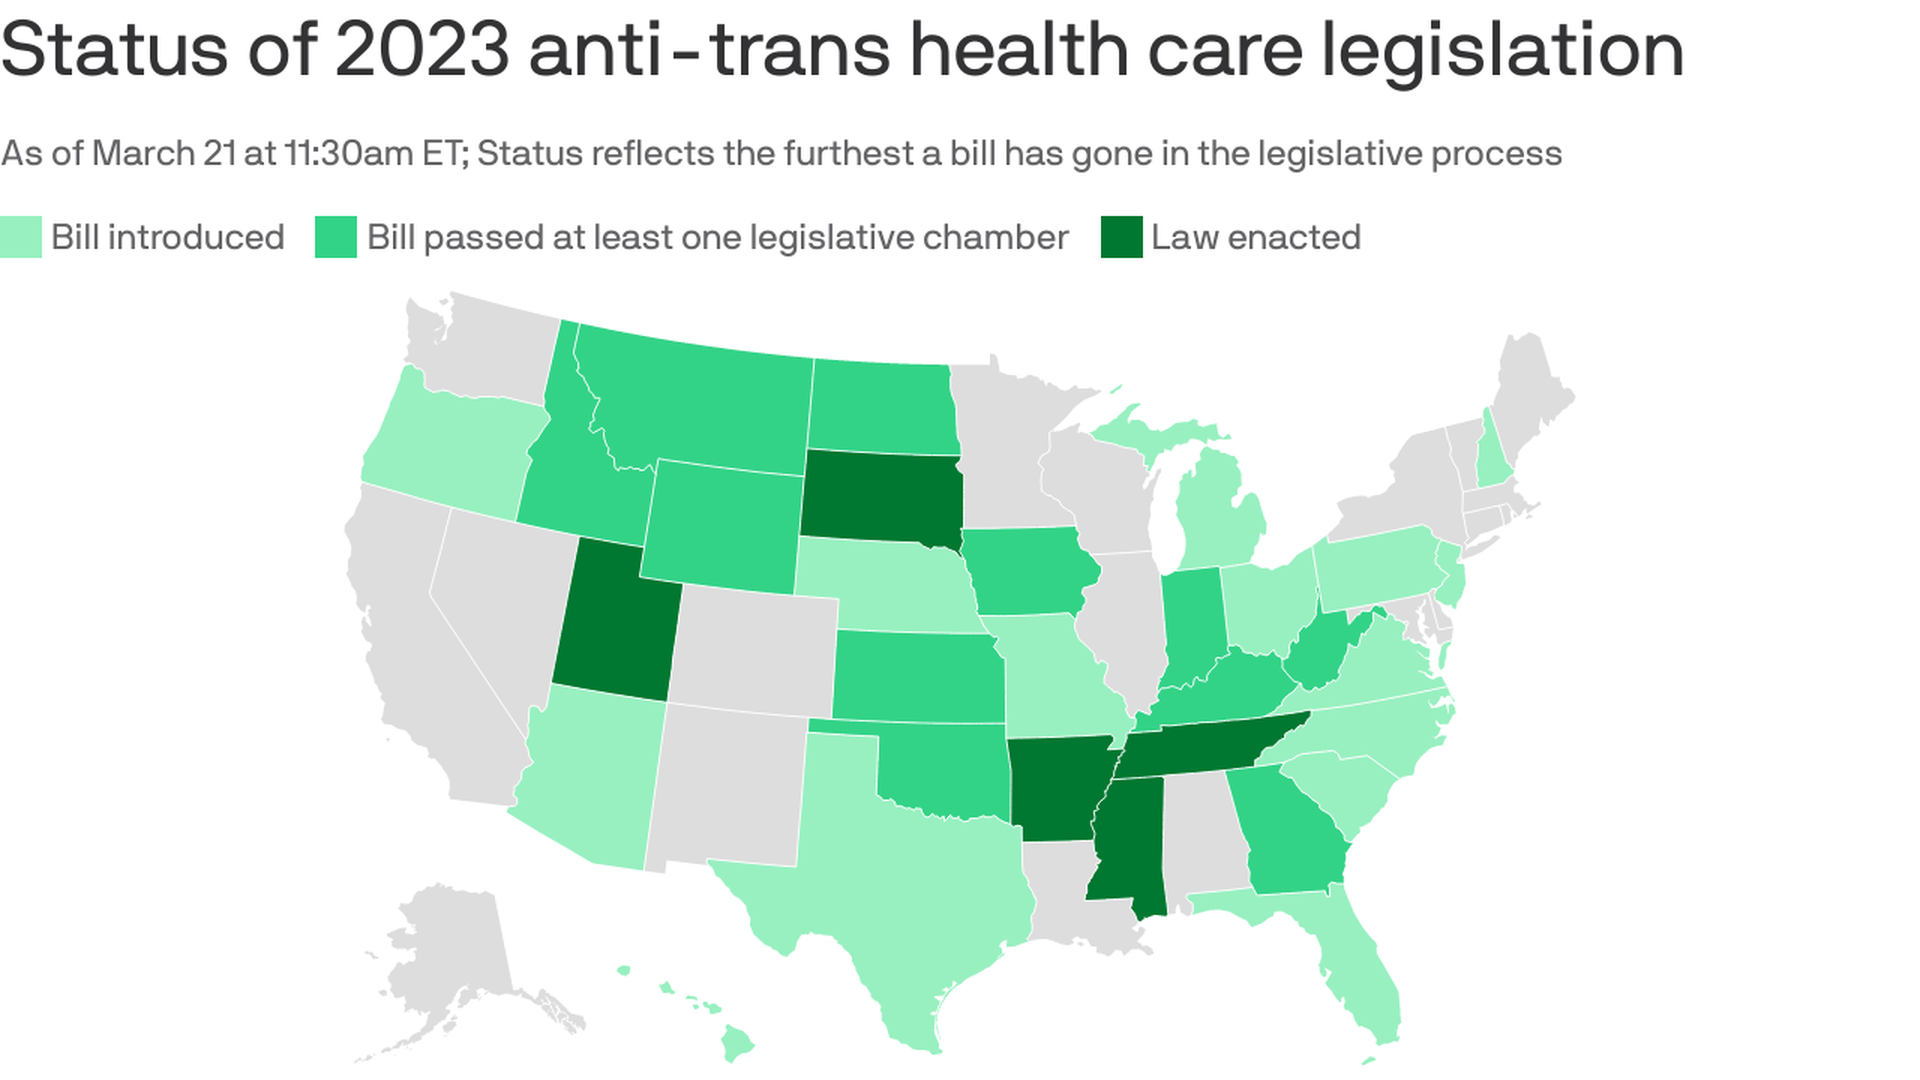 This is a map showing anti-transgender legislation by state.